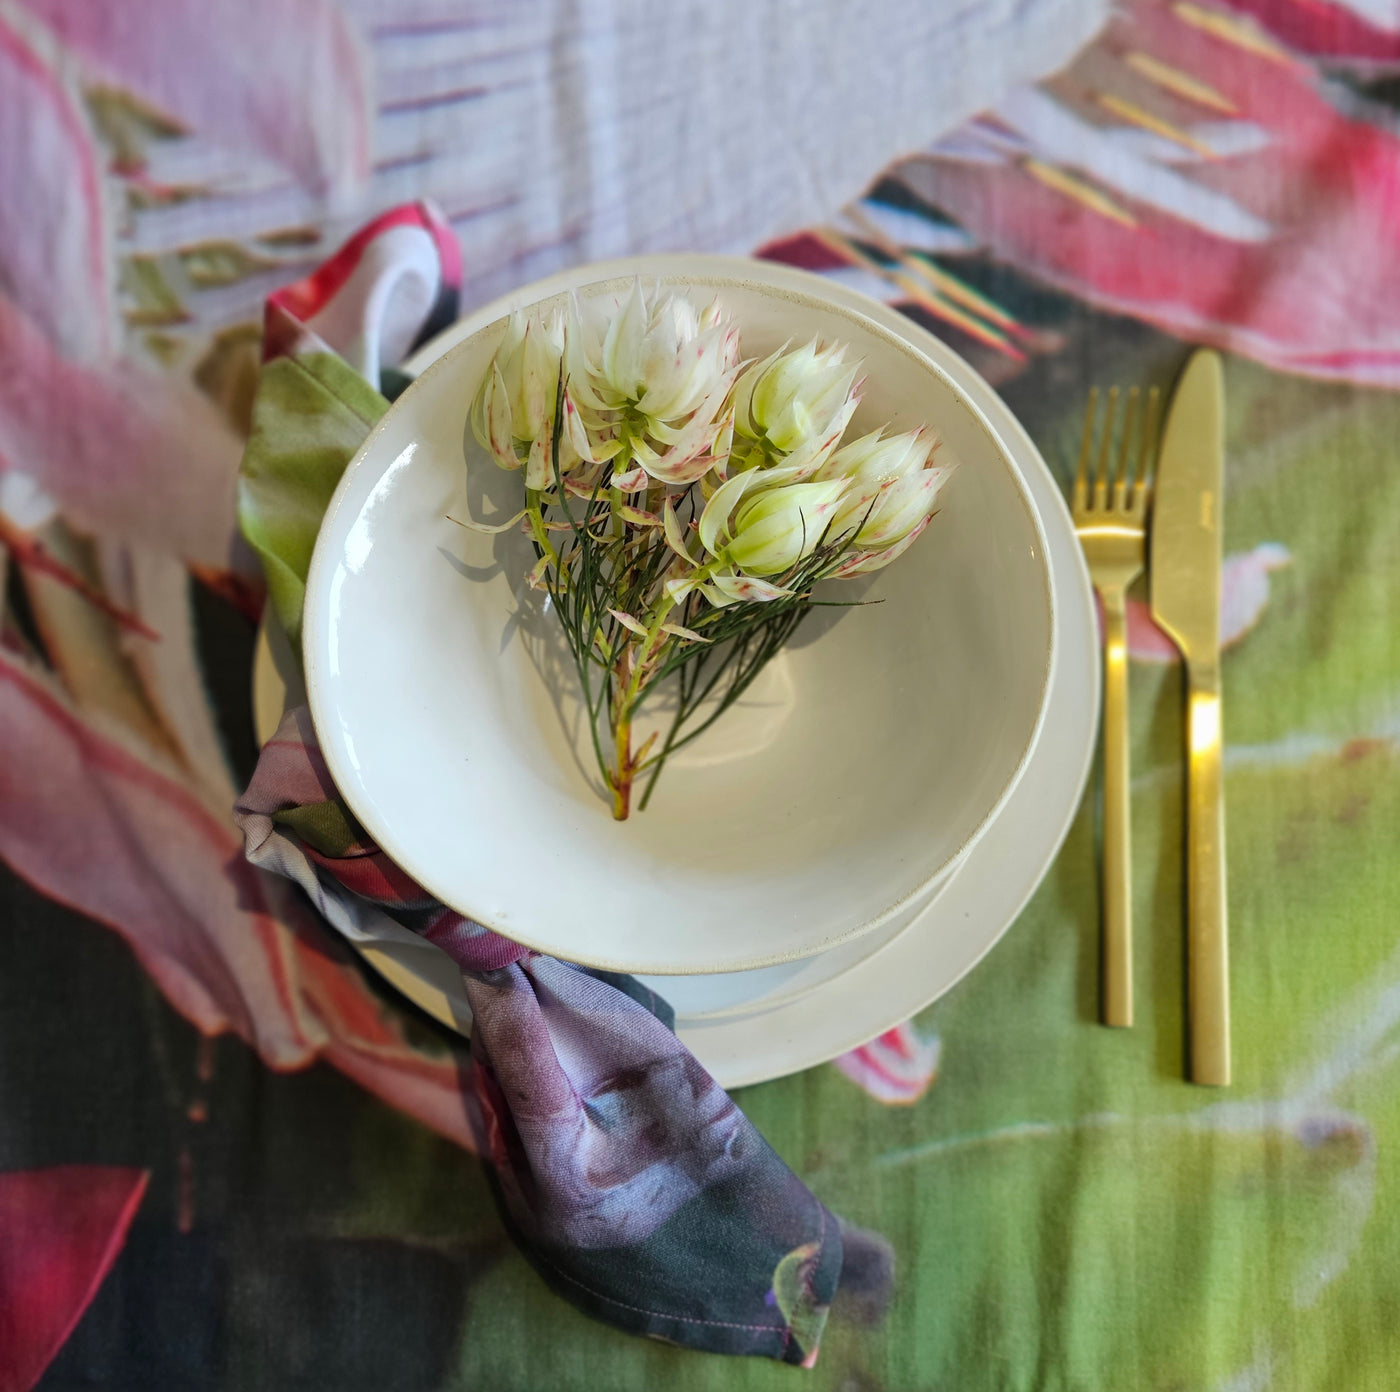 Flowers in a bowl with golden utensils on a flower tablecloth